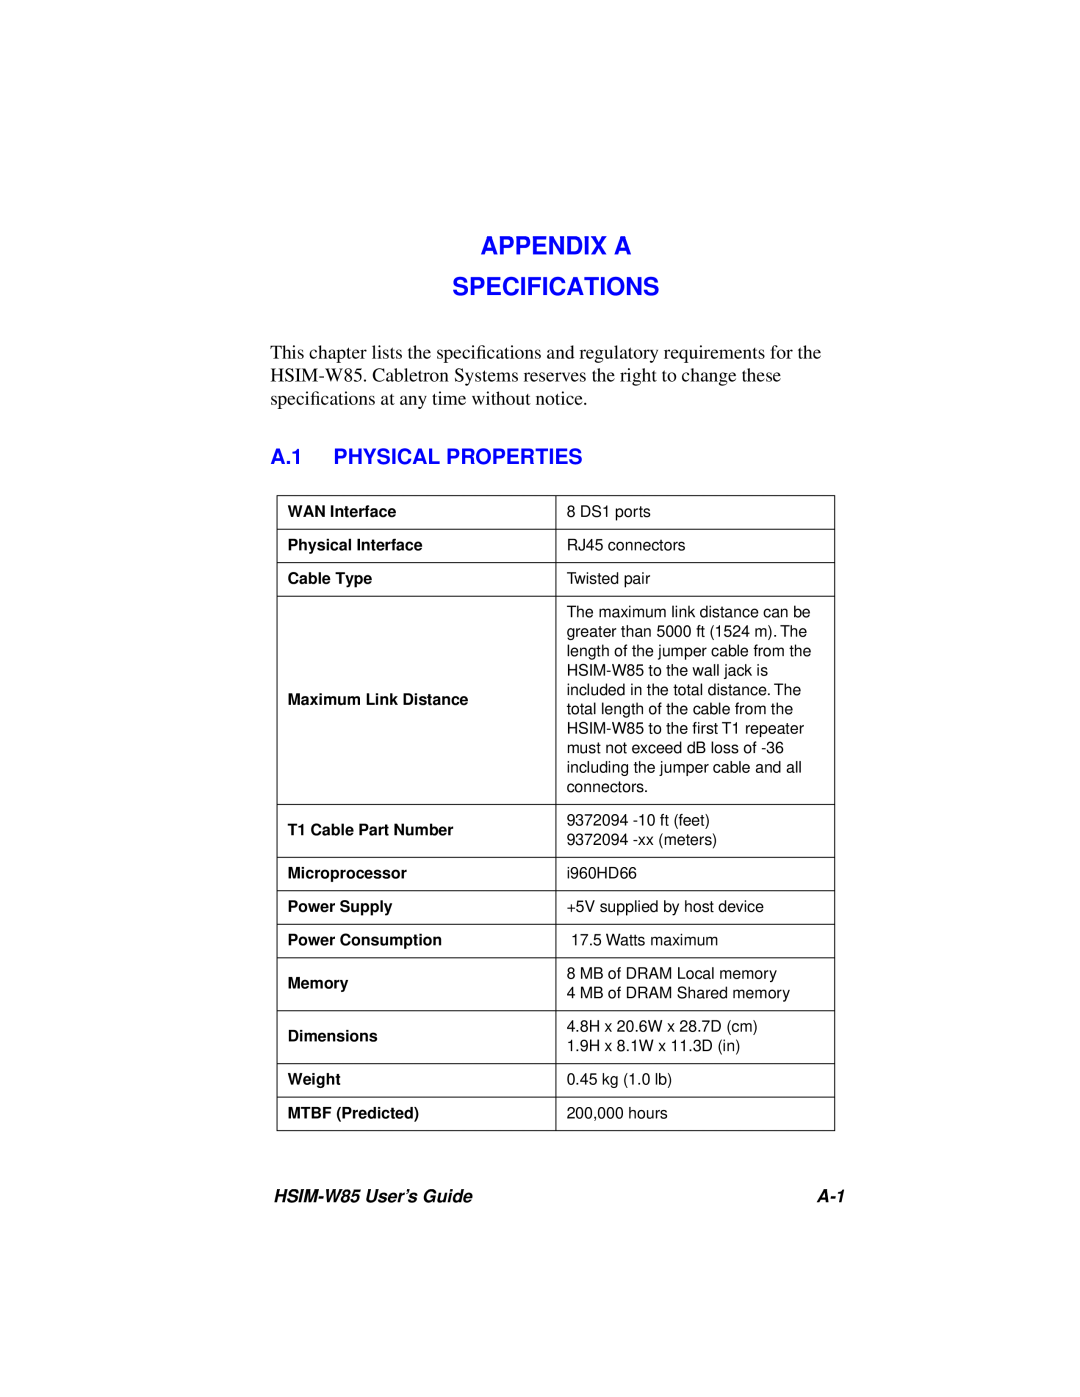 Cabletron Systems manual Appendix A Specifications, Physical Properties, HSIM-W85 User’s Guide 